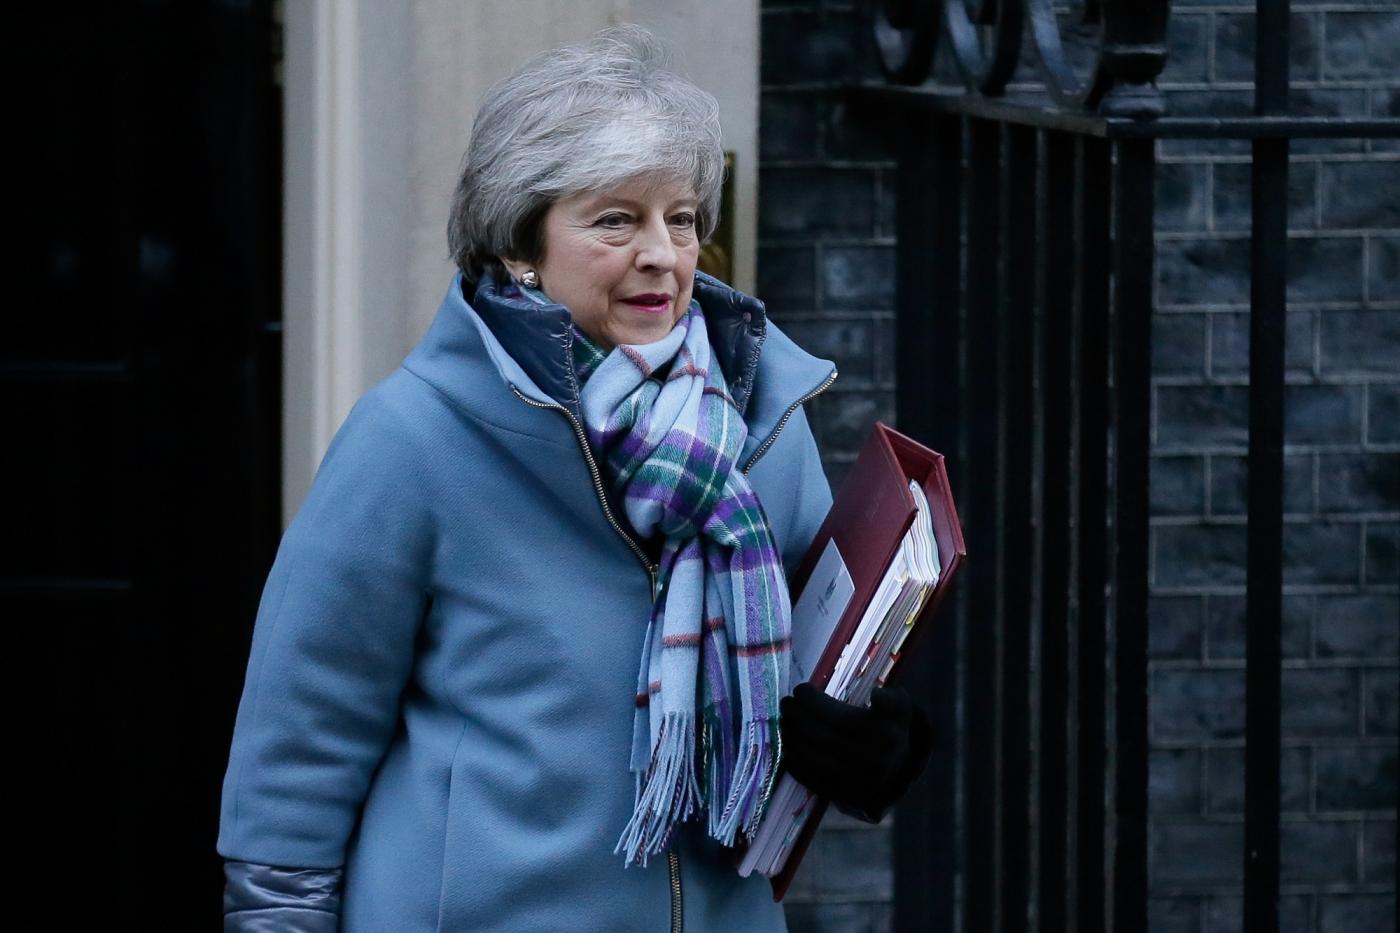 London, Jan. 30, 2019 (Xinhua) British Prime Minister Theresa May leaves 10 Downing Street for Prime Minister's Questions in the House of Commons in London, Britain, on Jan. 30, 2019. The British House of Commons on Tuesday passed an amendment to allow Prime Minister Theresa May to renegotiate a Brexit deal with the European Union (EU) despite repeated warnings from Brussels that it does not want to reopen the treaty signed off by the other 27 EU leaders. (Xinhua/Tim Ireland/IANS) by .